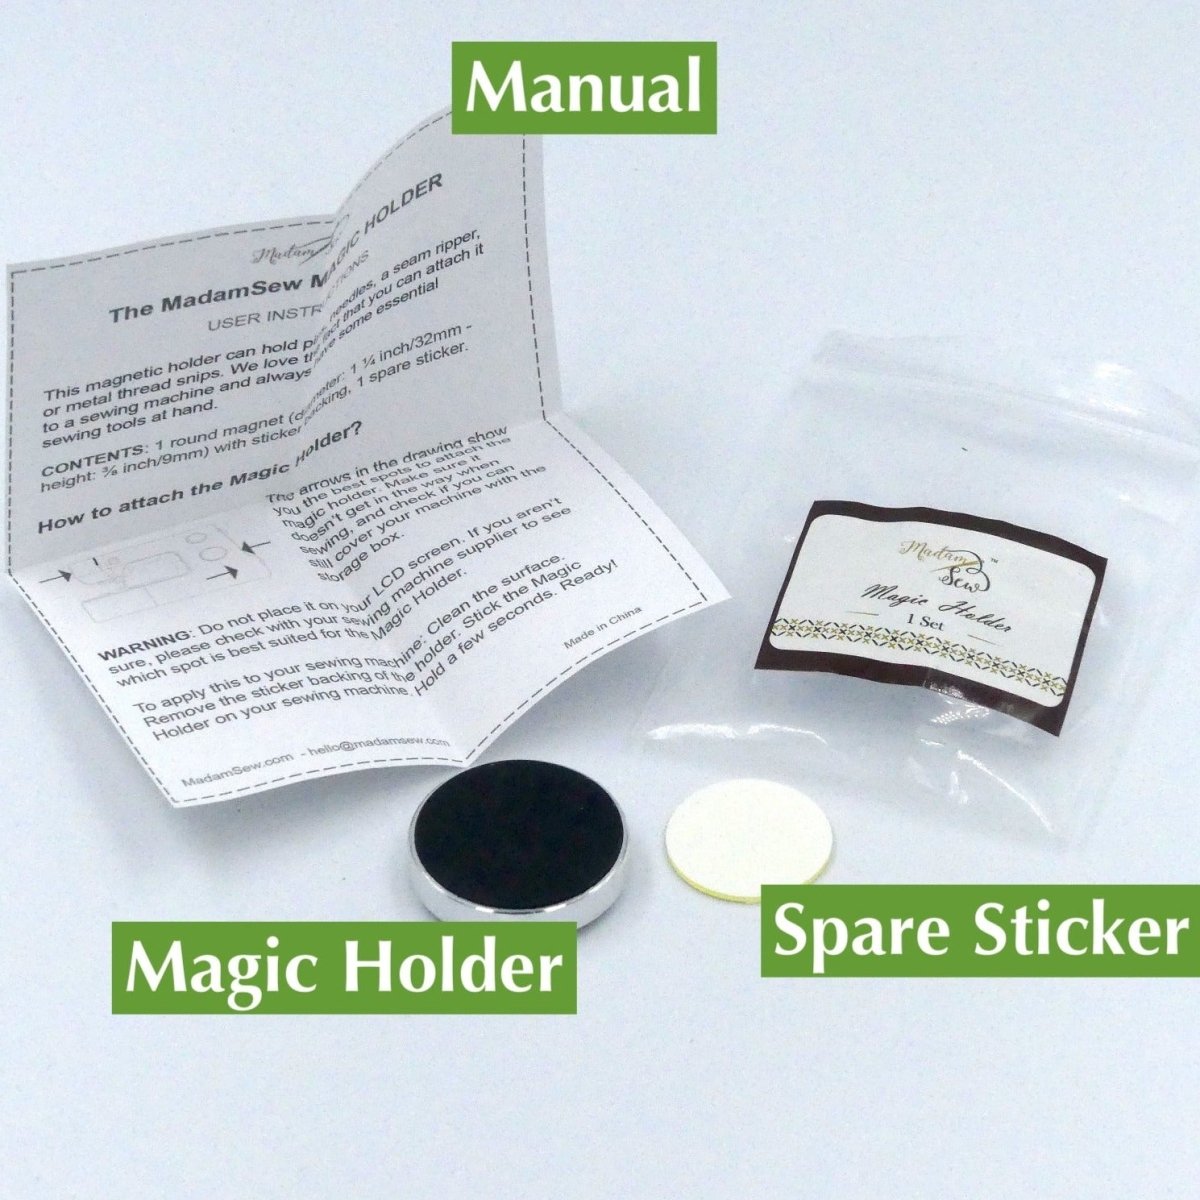 Magic Holder, packaging, instructions and spare sticker.